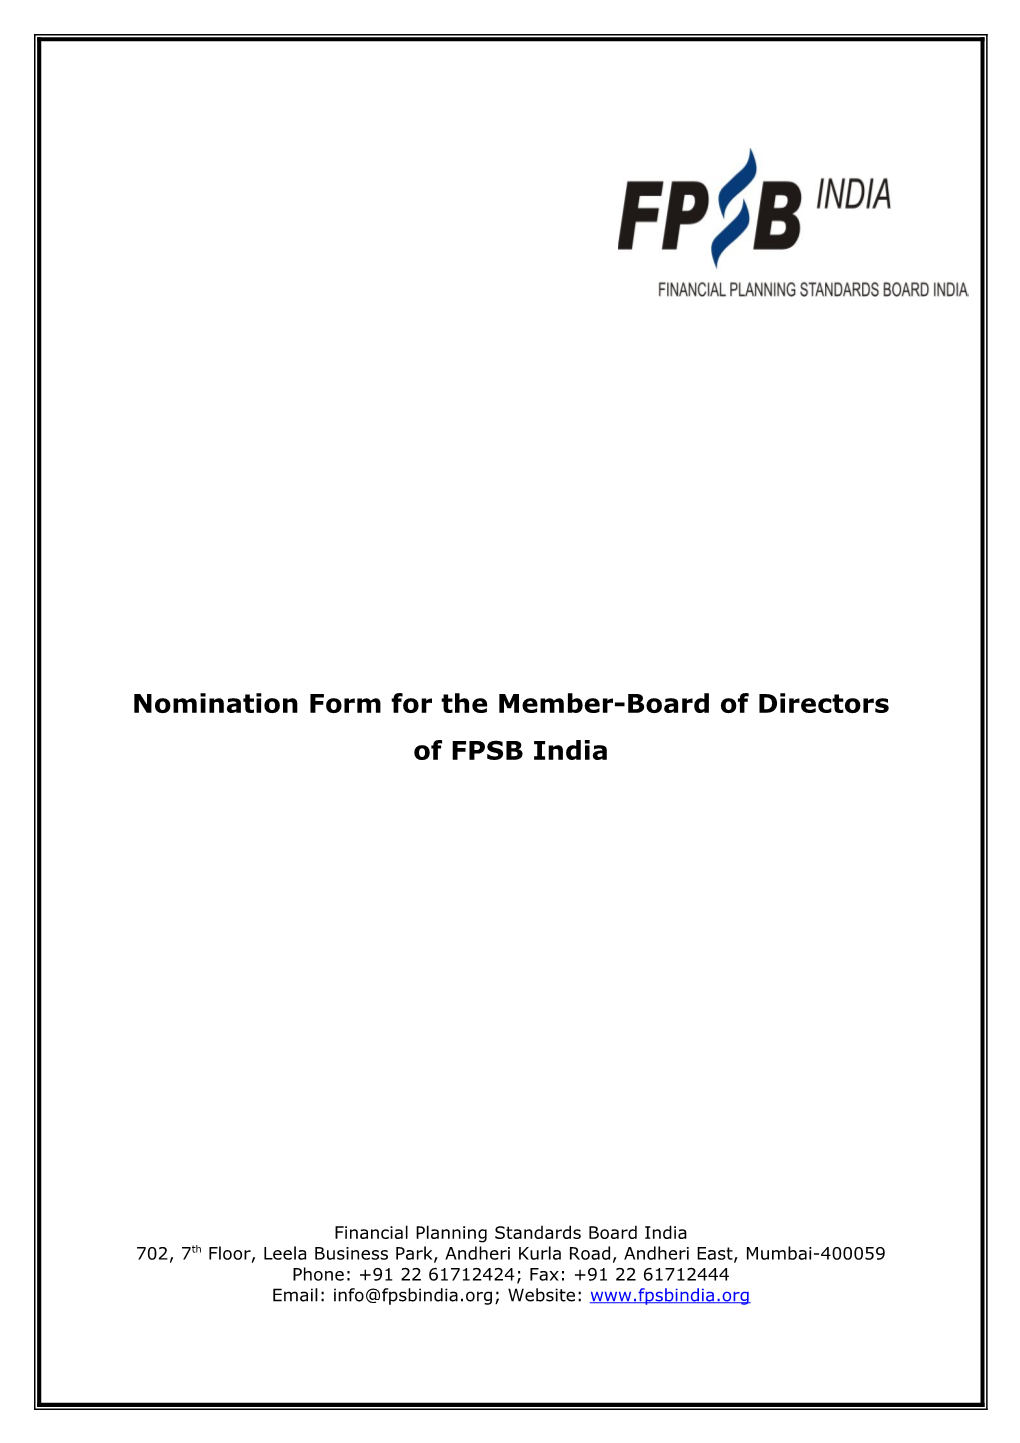 Nomination Form for the Member-Board of Directors Offpsb India